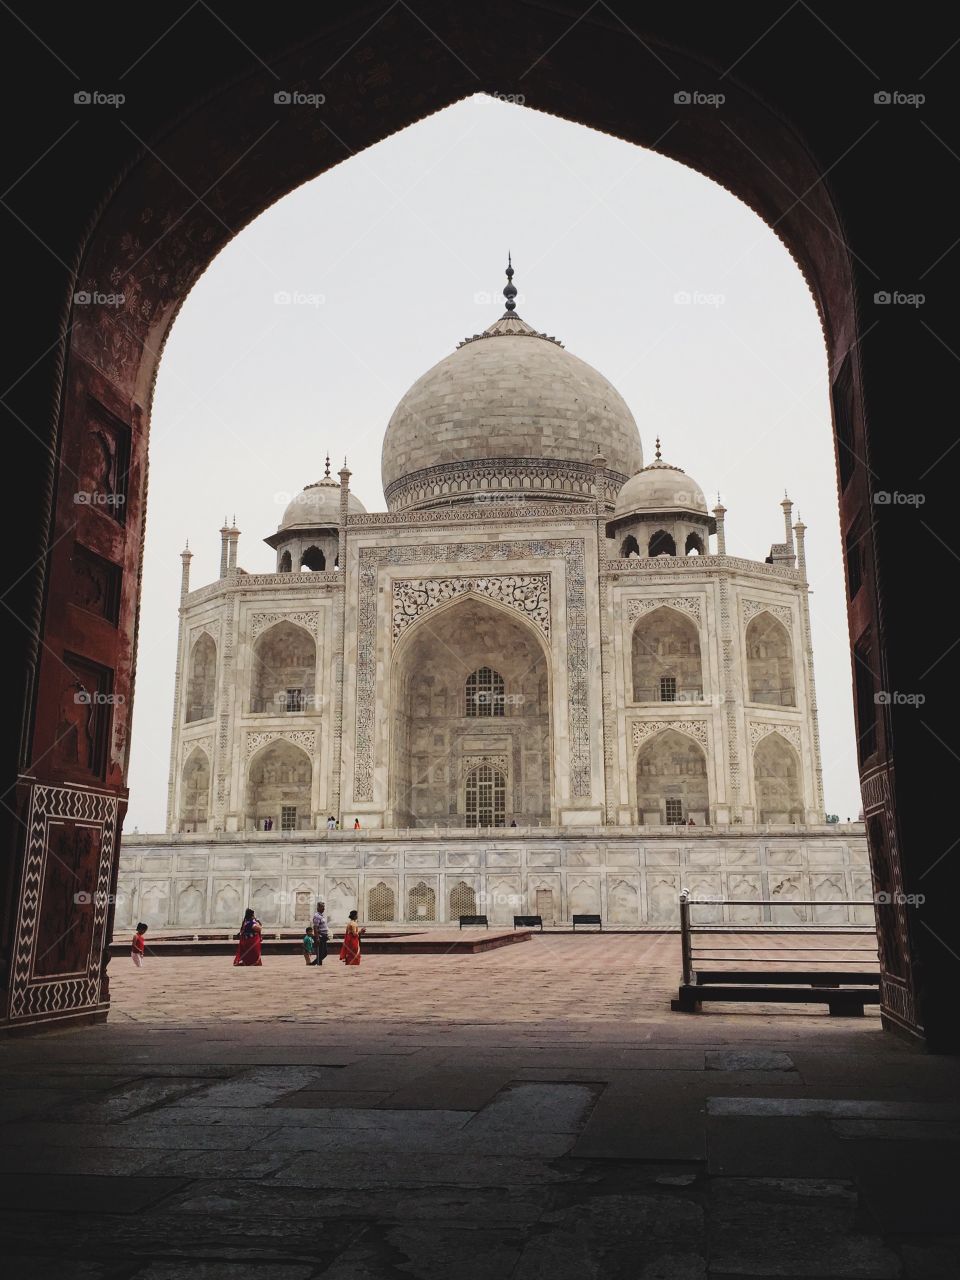 The Taj Mahal from the West Gate